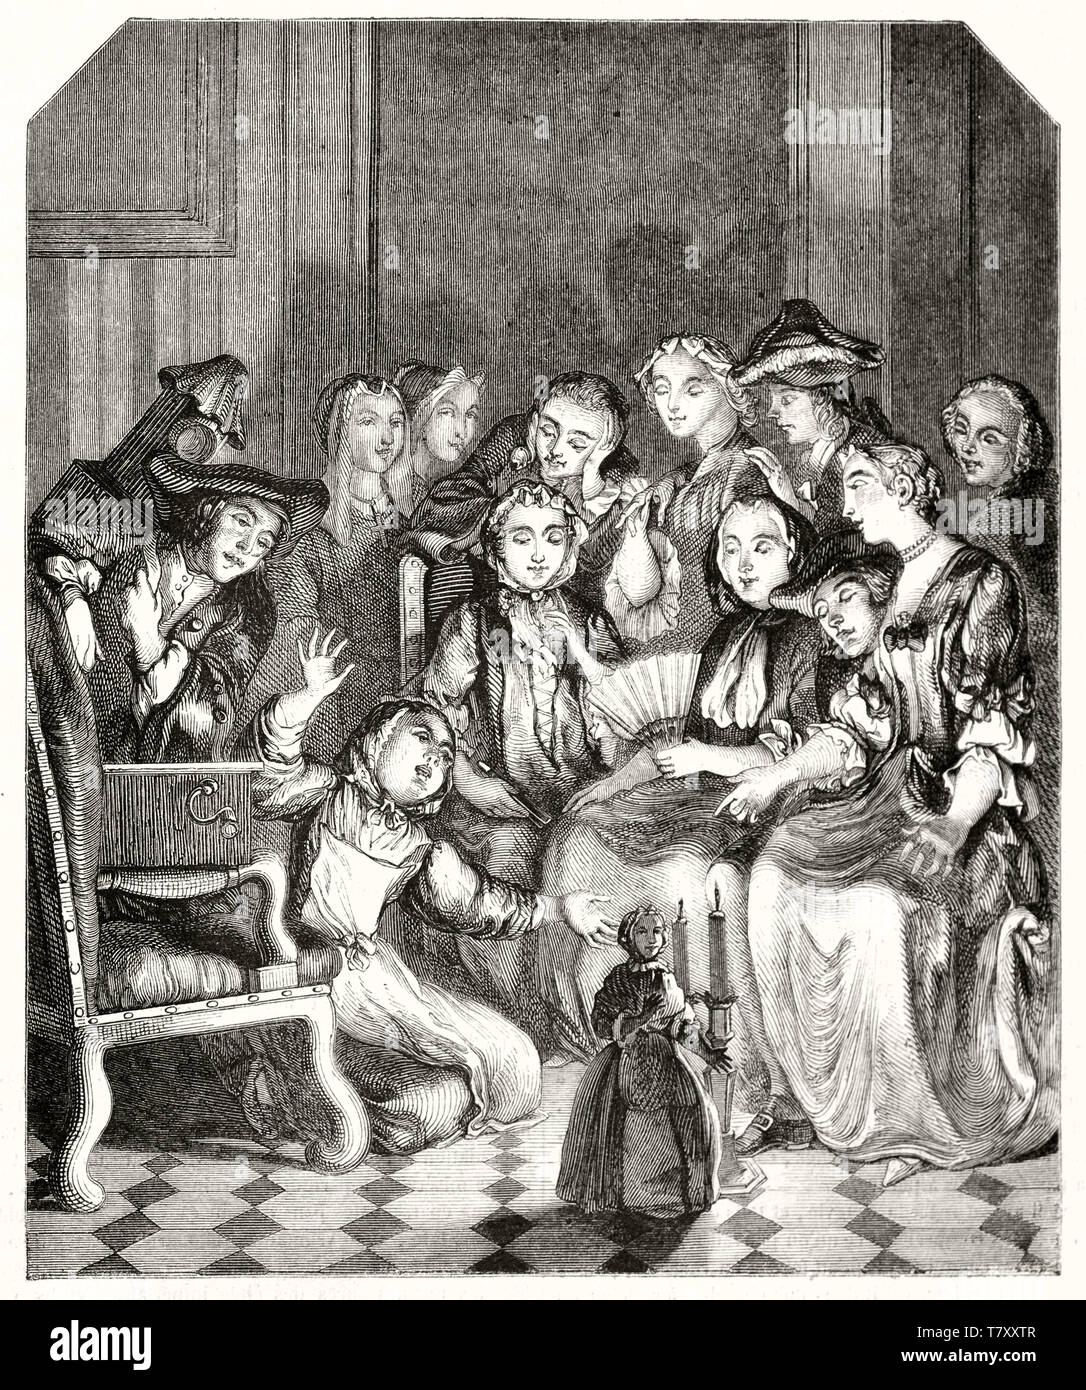 Group of ancient women admiring a clockwork mechanism doll indoor in a shadowy room with a small light. Old etching style illustration after Cochin publ. on Magasin Pittoresque Paris 1848 Stock Photo